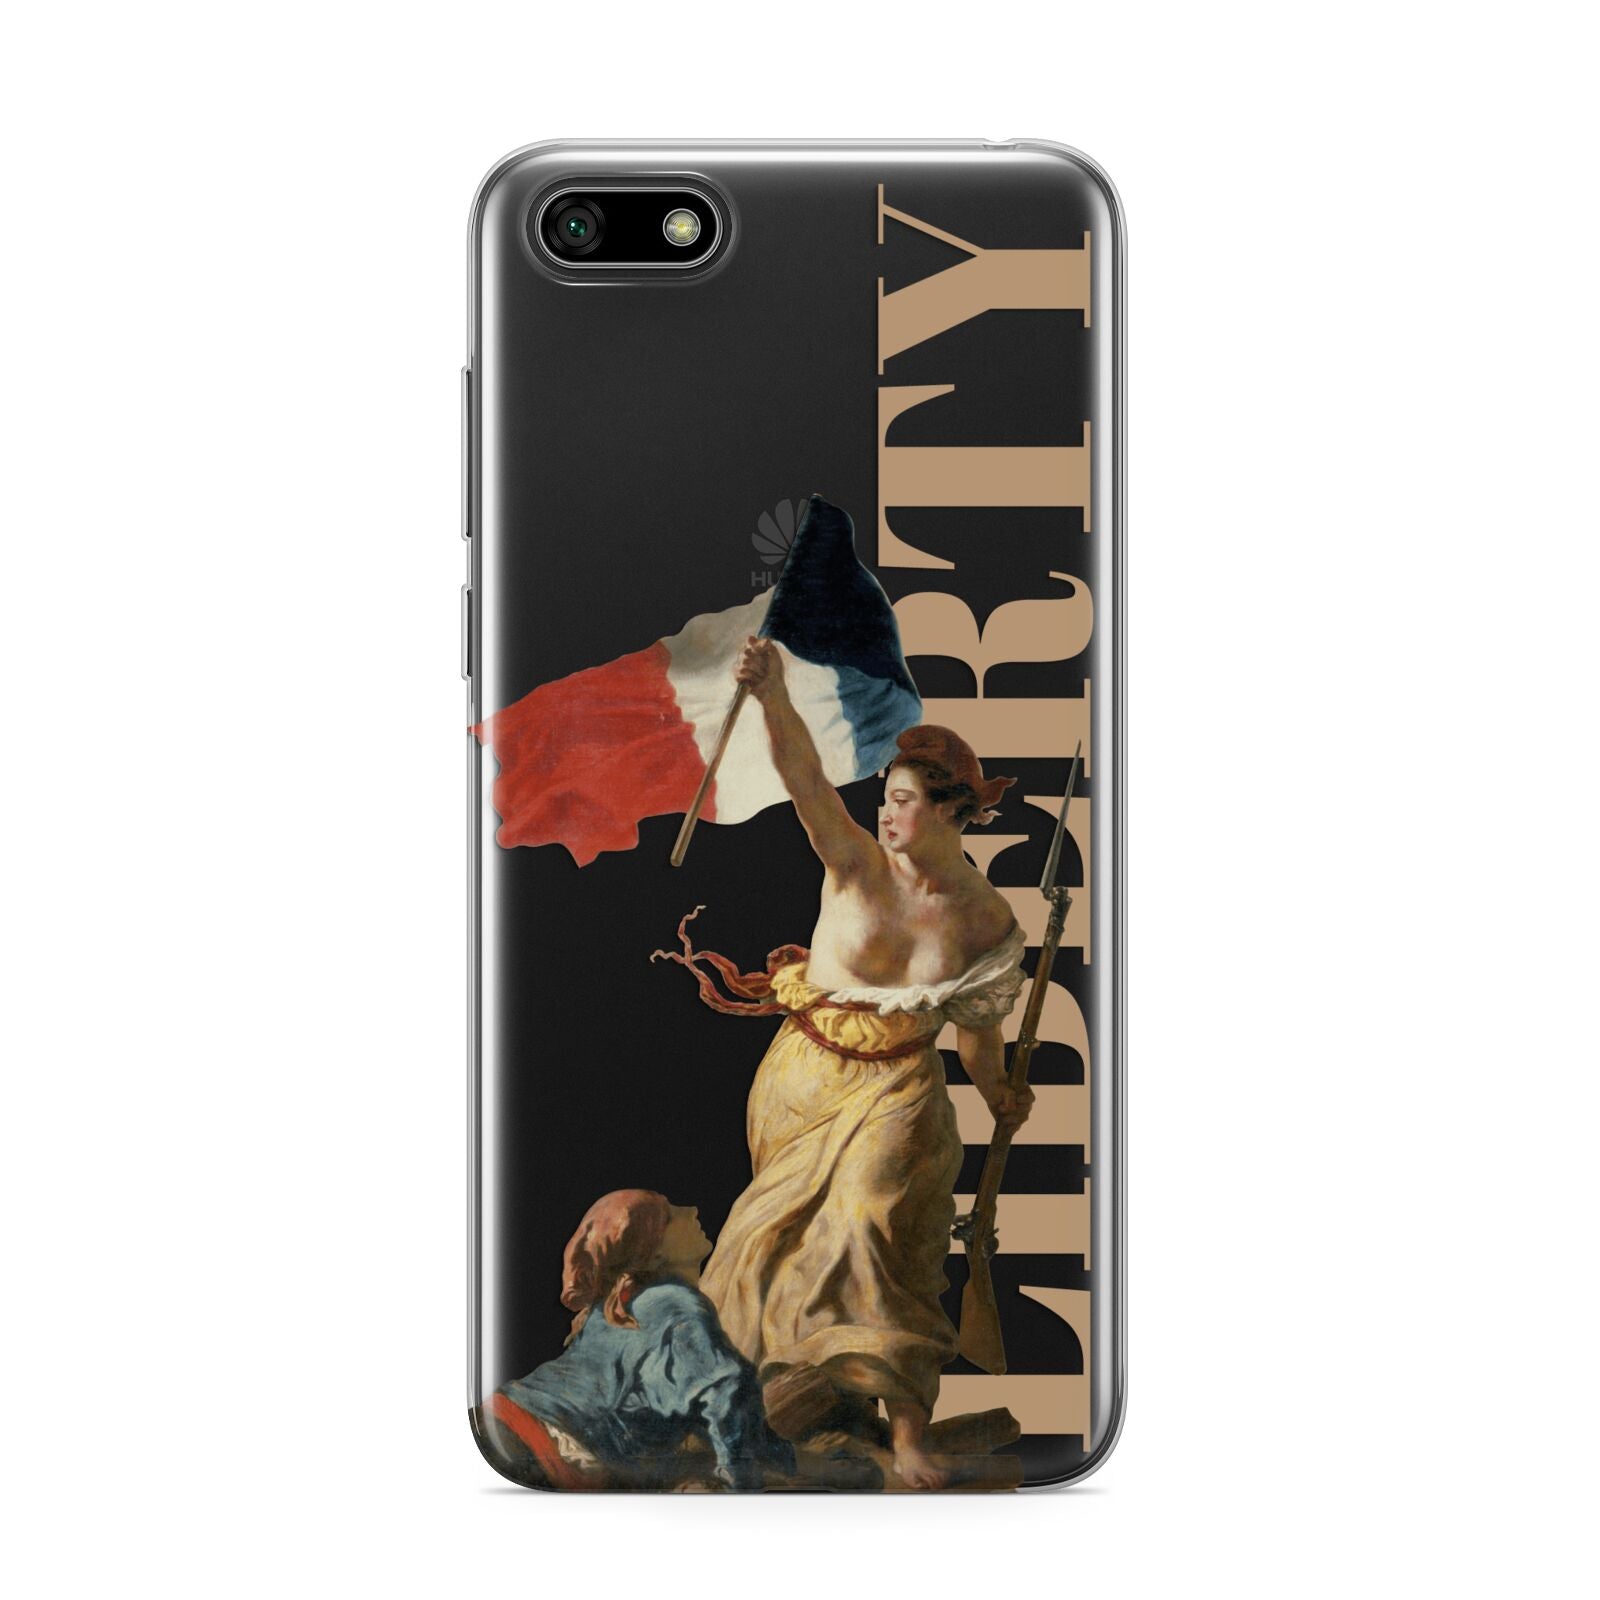 Liberty Huawei Y5 Prime 2018 Phone Case